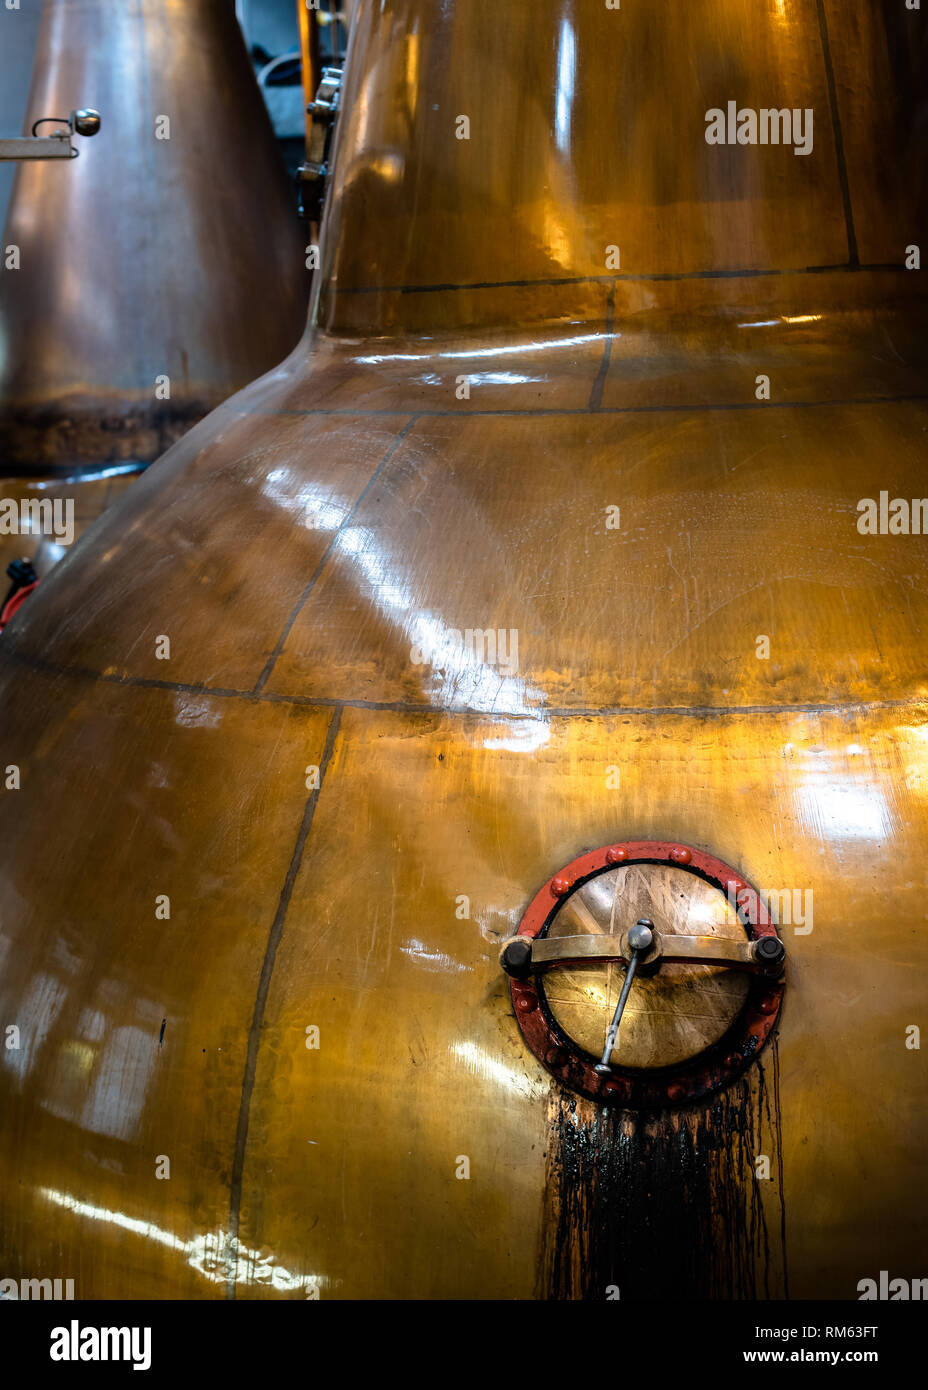 Old copper whisky pot still showing the opening hatch at the Balblair whisky distillery, Edderton, Ross-shire, Scotland Stock Photo